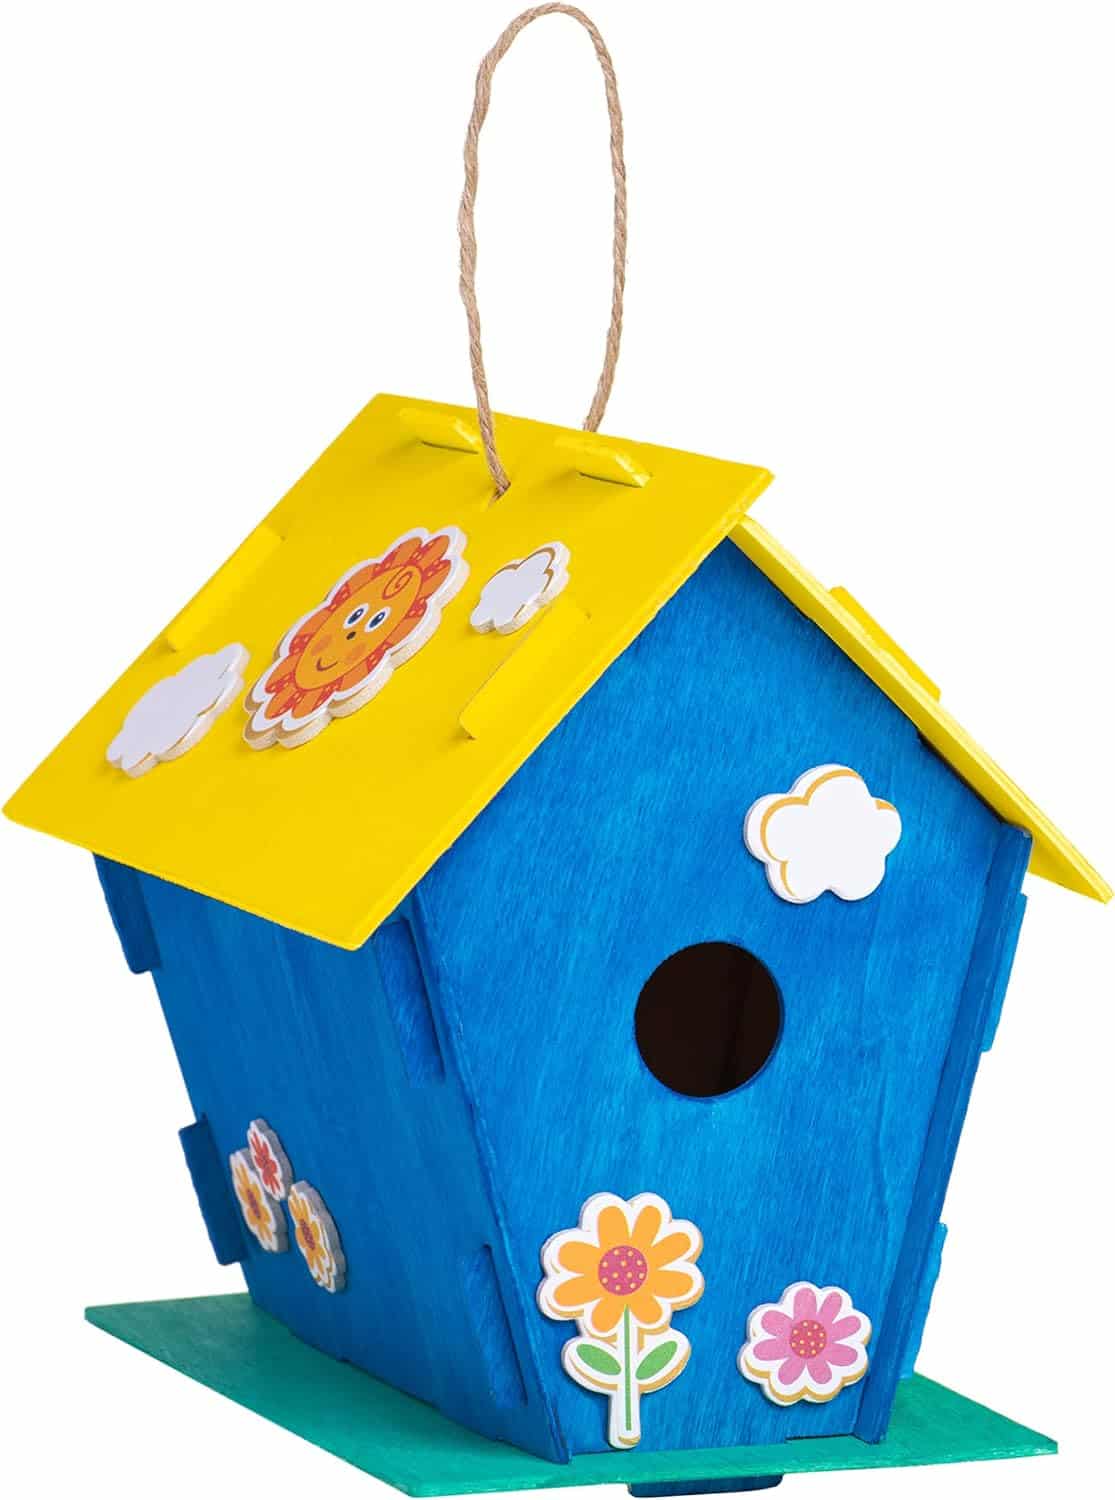 Neliblu 12 DIY Wooden Birdhouses - A Fun and Educational Craft Set for Kids and Adults